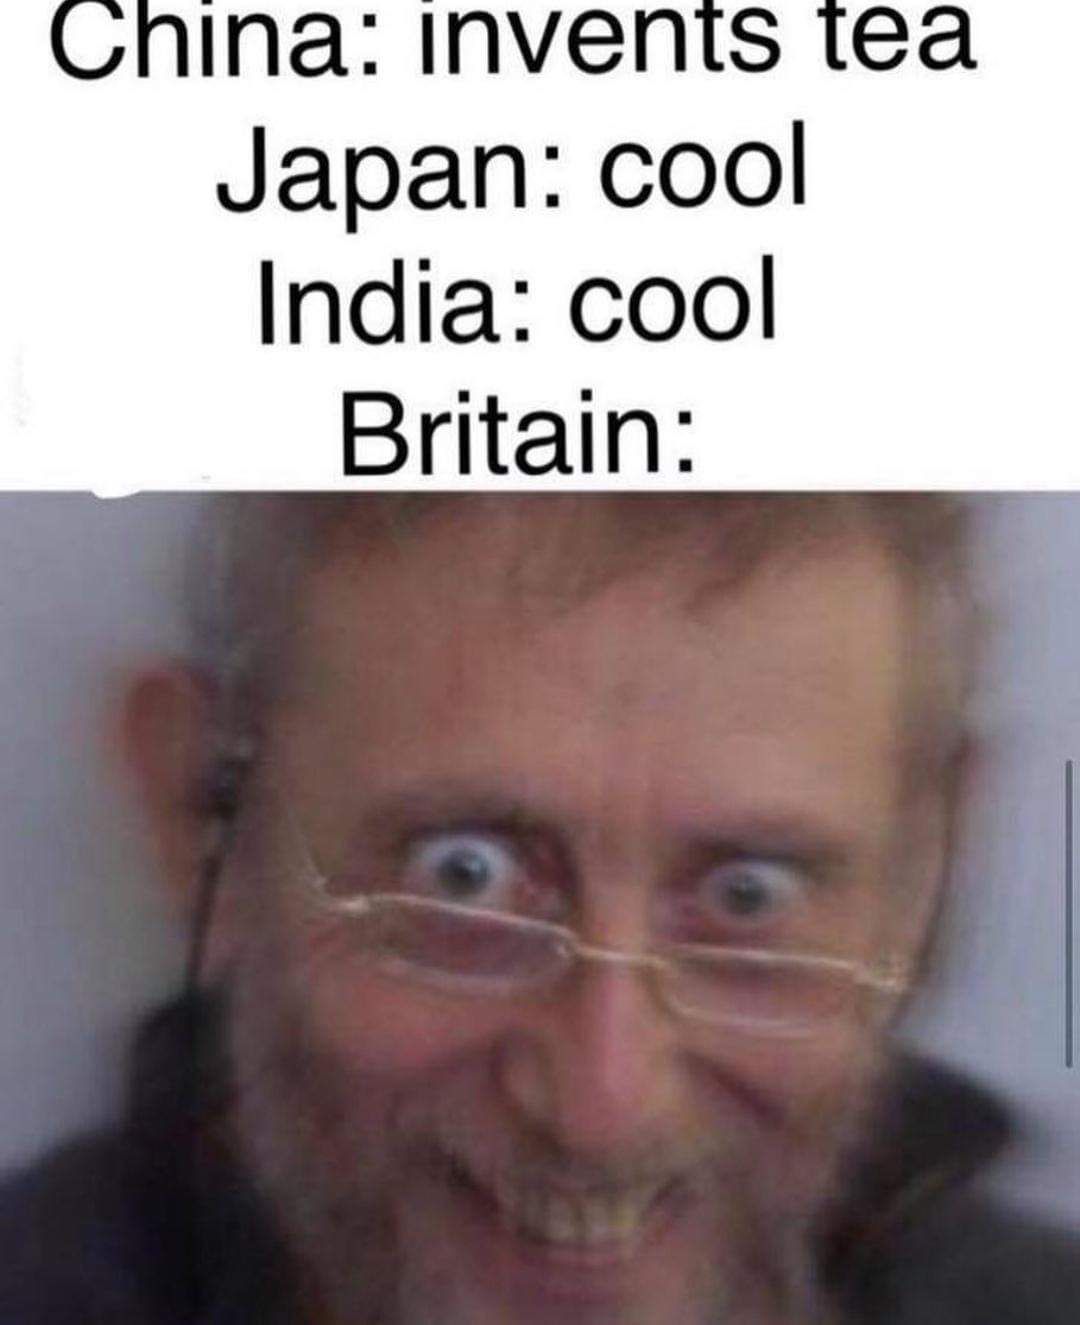 Silly Britain